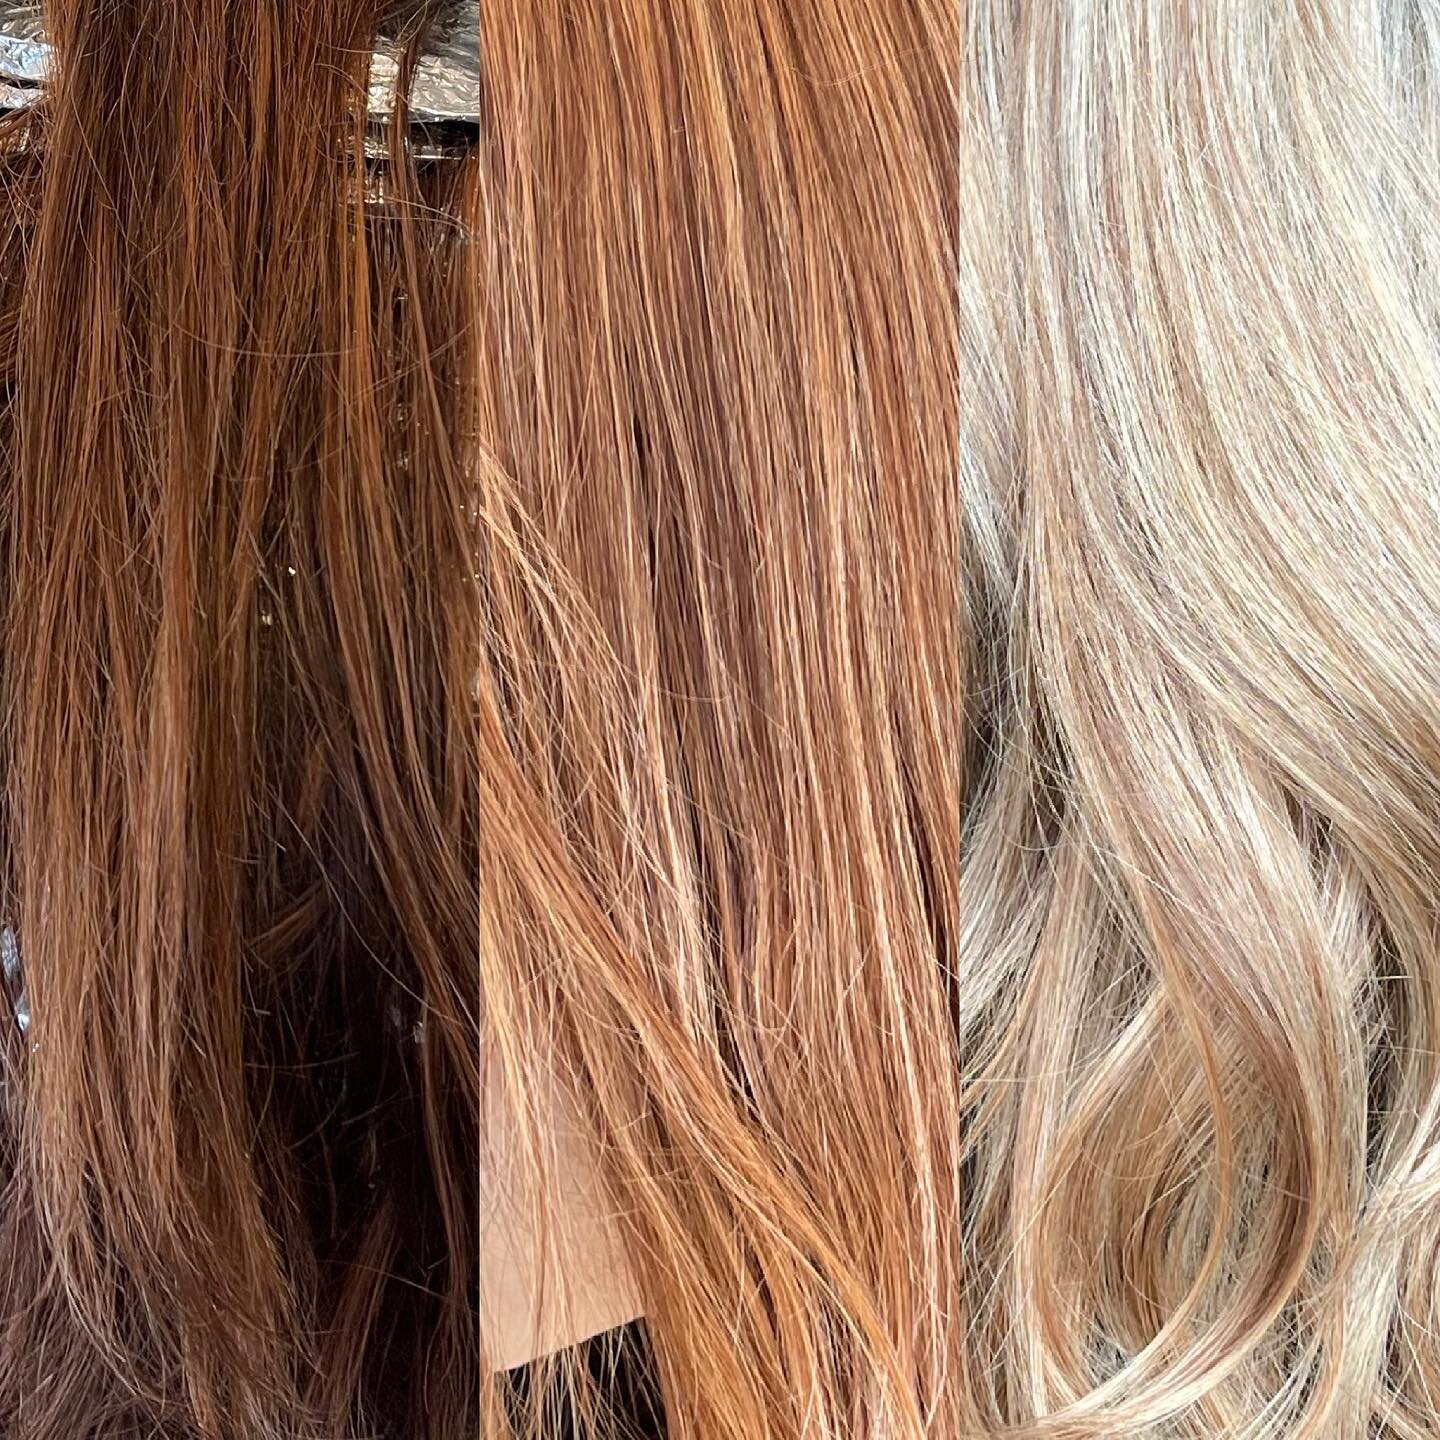 👏🏻 TRUST 👏🏻 THE 👏🏻 PROCESS 👏🏻
.
.
.
Over the course of 3 appointments and upwards to around $450, we took @mrs_stoffels from a faded red to a beautiful, bright blonde! The hair of your dreams is possible but it will take time, patience, maint